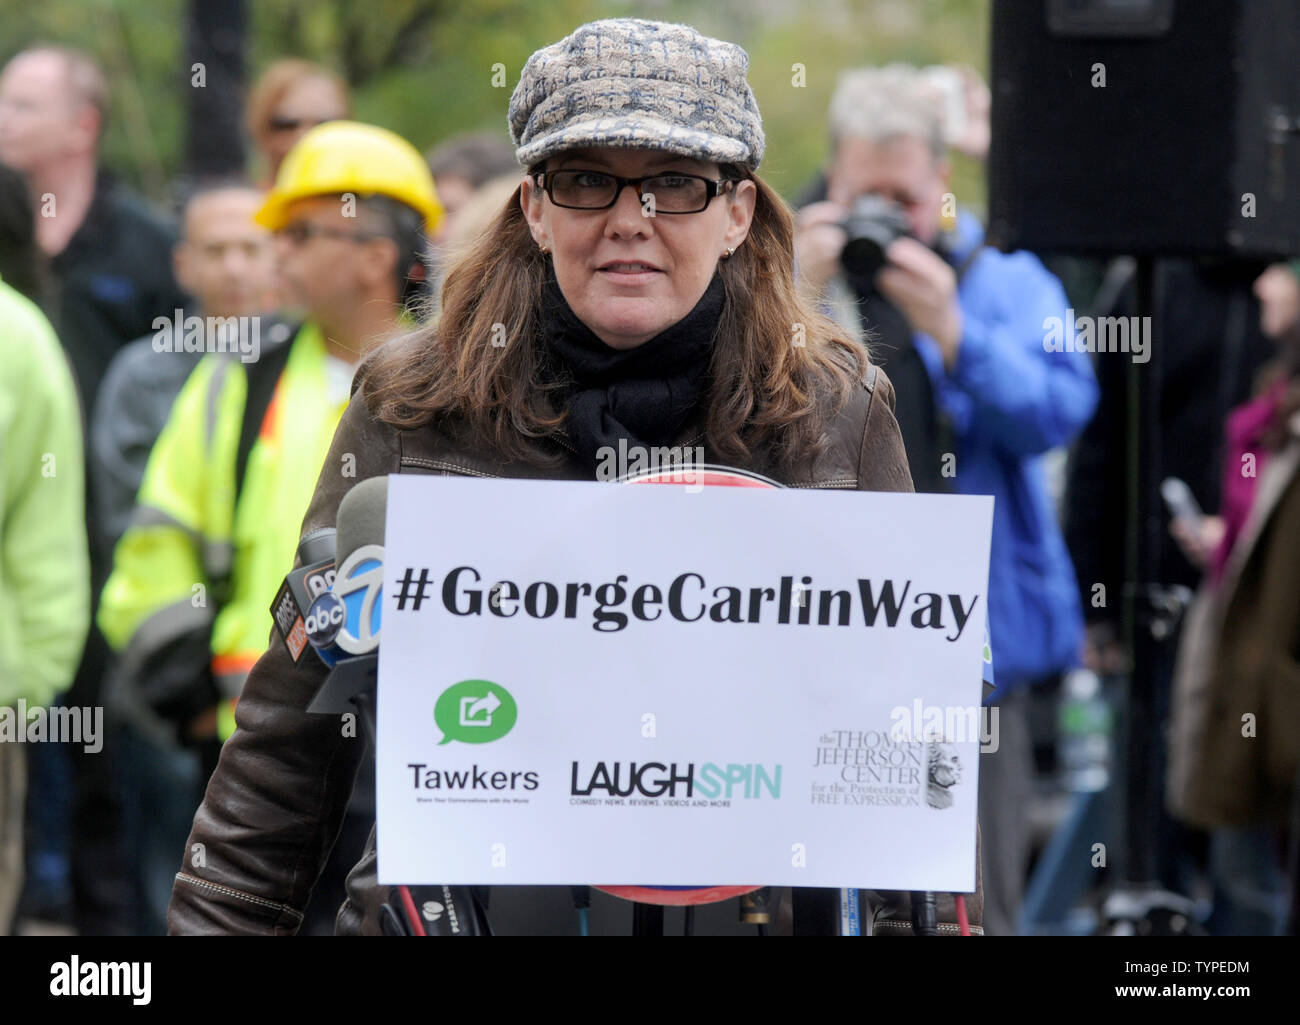 Kelly Carlin speaks at the George Carlin Way Unveiling Ceremony in New York City on October 22, 2014. During a special ceremony Wednesday afternoon, a sign went up on the block naming it 'George Carlin Way'.  The late comedian grew up on West 121st Street between Broadway and Amsterdam in Morningside Heights.       UPI/Dennis Van Tine Stock Photo